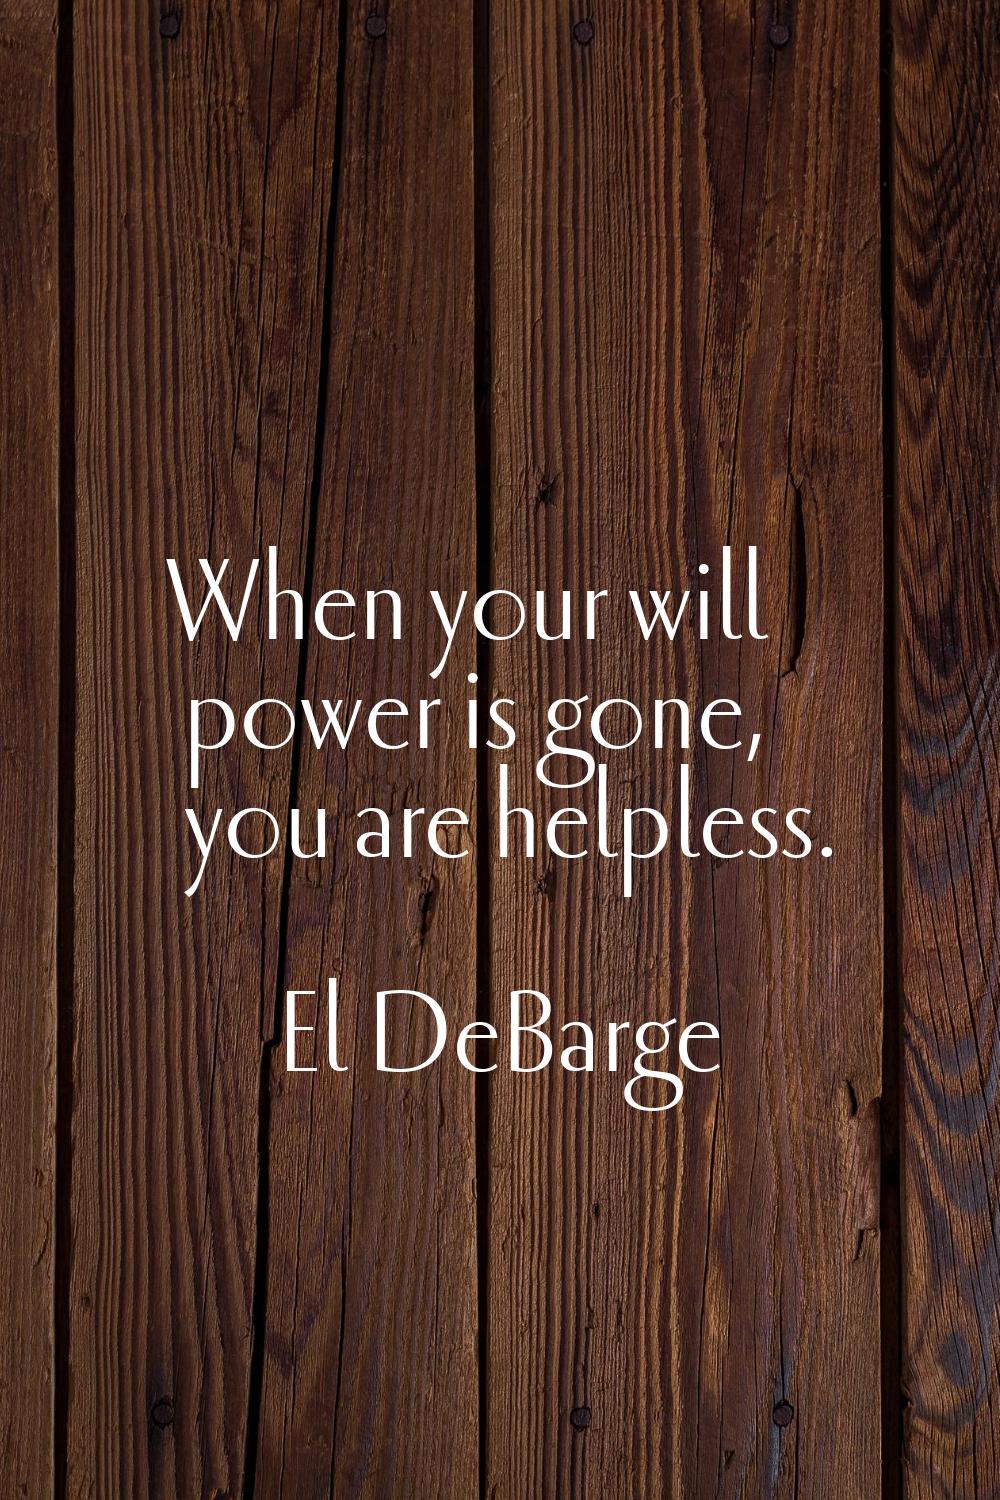 When your will power is gone, you are helpless.